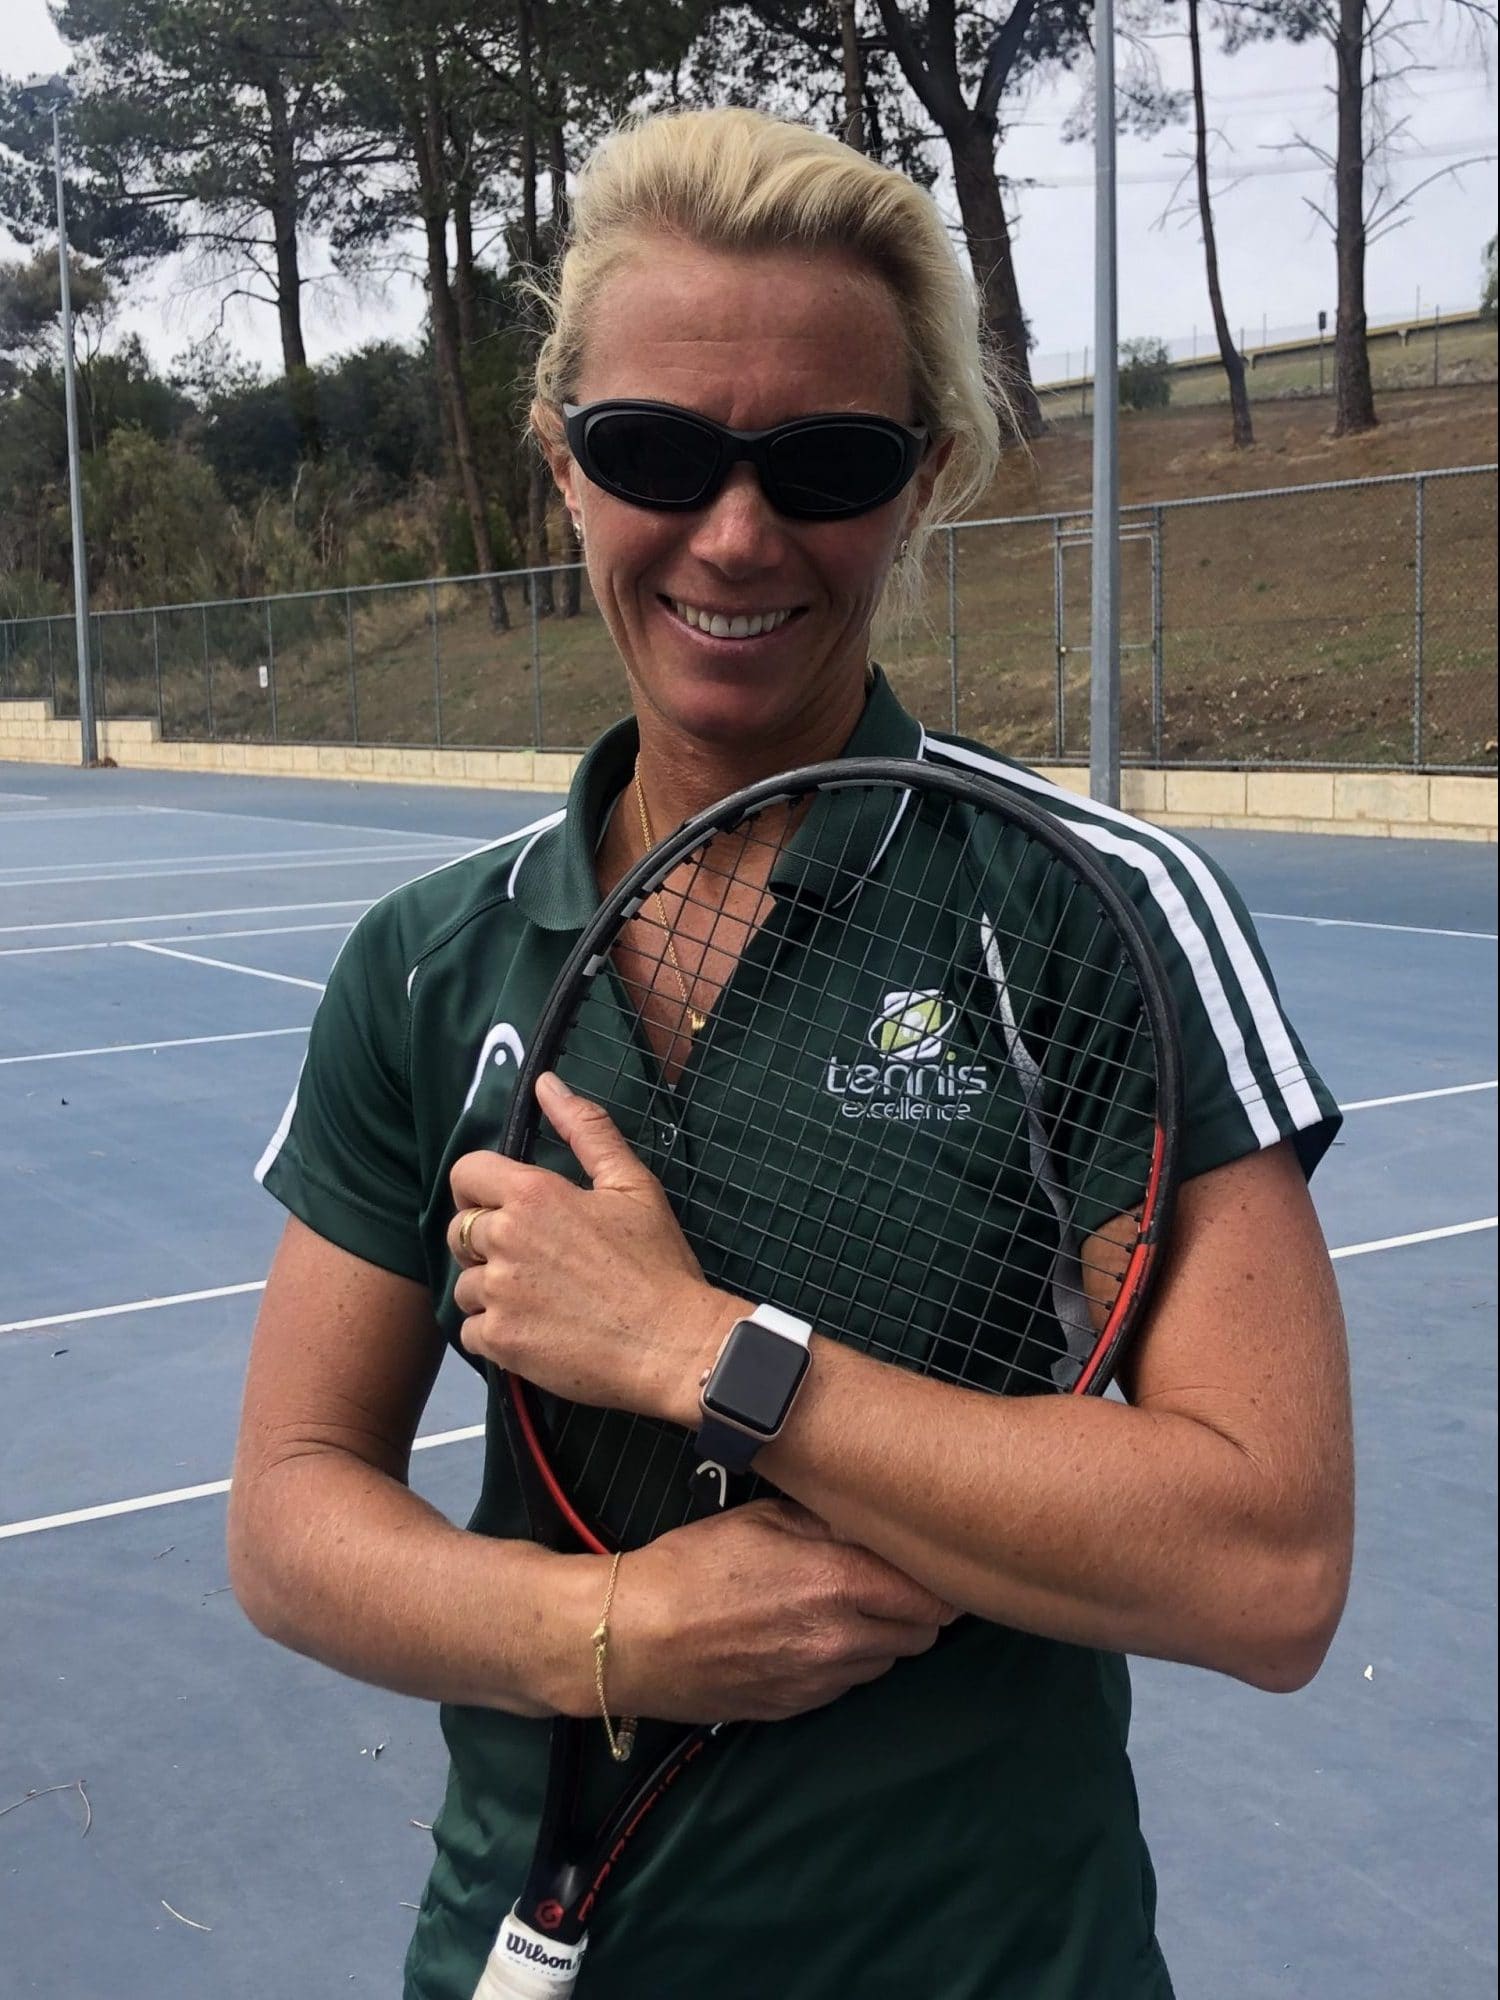 https://www.tennisexcellence.com.au/wp-content/uploads/2020/05/Coach_Emily-Hare-scaled-e1589862688533.jpg